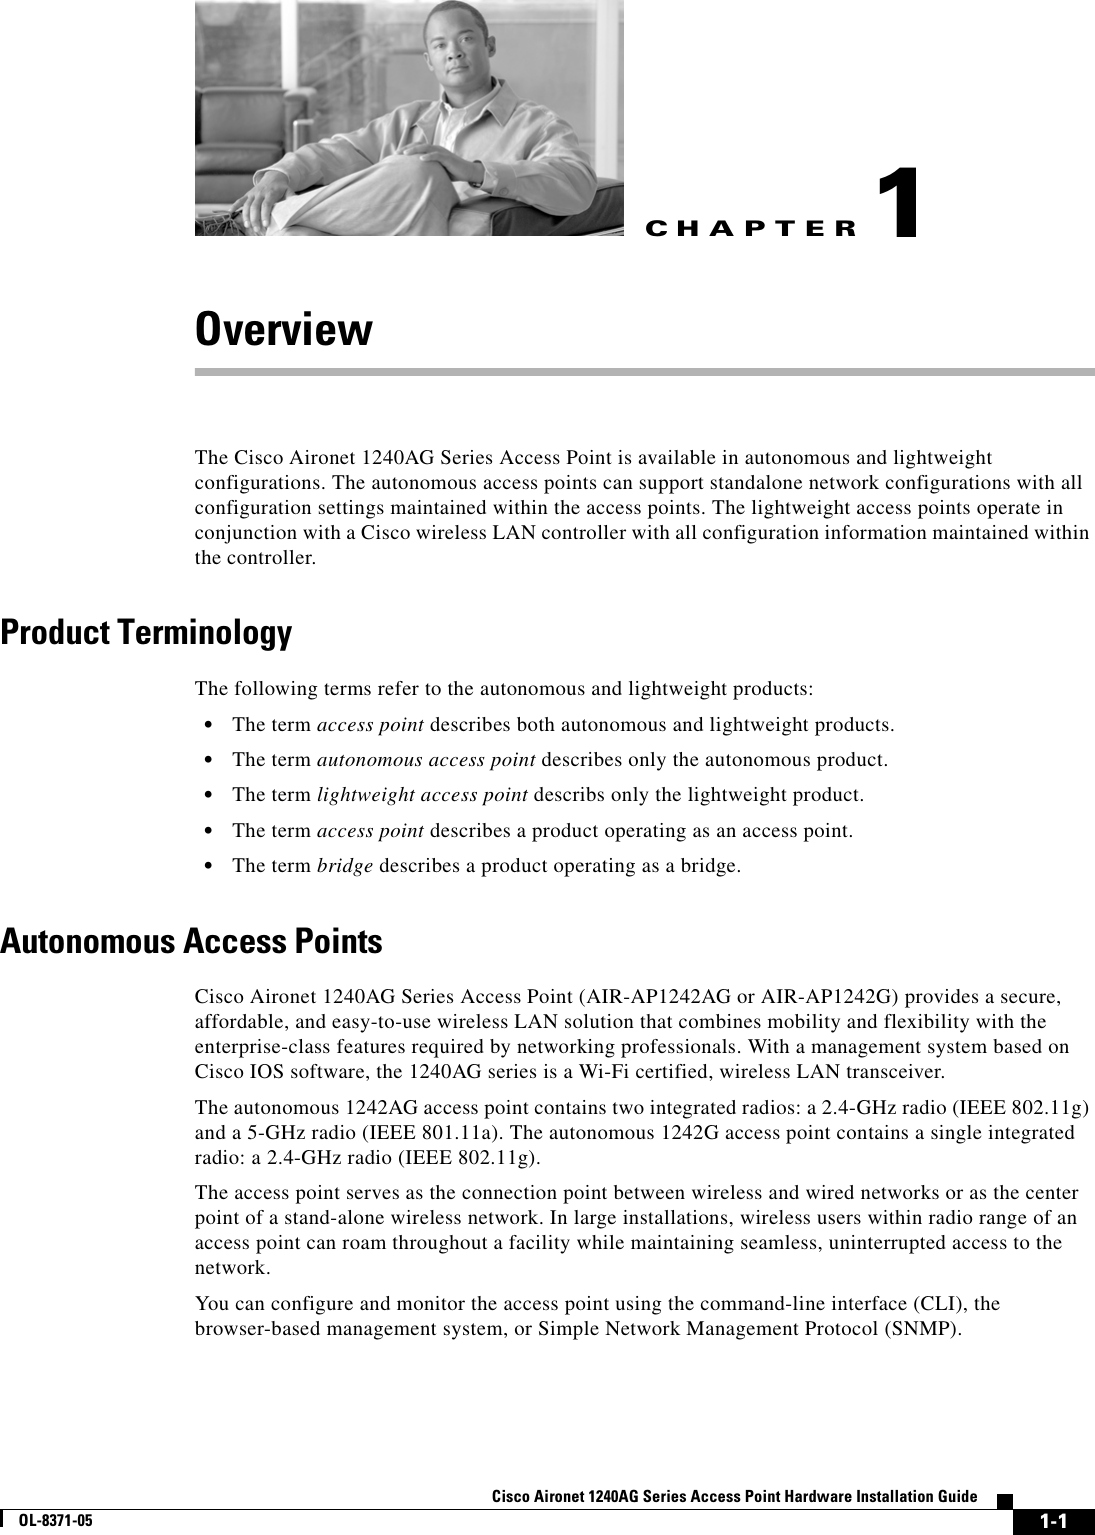 CHAPTER 1-1Cisco Aironet 1240AG Series Access Point Hardware Installation GuideOL-8371-051OverviewThe Cisco Aironet 1240AG Series Access Point is available in autonomous and lightweight configurations. The autonomous access points can support standalone network configurations with all configuration settings maintained within the access points. The lightweight access points operate in conjunction with a Cisco wireless LAN controller with all configuration information maintained within the controller.Product TerminologyThe following terms refer to the autonomous and lightweight products:•The term access point describes both autonomous and lightweight products. •The term autonomous access point describes only the autonomous product. •The term lightweight access point describs only the lightweight product.•The term access point describes a product operating as an access point.•The term bridge describes a product operating as a bridge.Autonomous Access PointsCisco Aironet 1240AG Series Access Point (AIR-AP1242AG or AIR-AP1242G) provides a secure, affordable, and easy-to-use wireless LAN solution that combines mobility and flexibility with the enterprise-class features required by networking professionals. With a management system based on Cisco IOS software, the 1240AG series is a Wi-Fi certified, wireless LAN transceiver. The autonomous 1242AG access point contains two integrated radios: a 2.4-GHz radio (IEEE 802.11g) and a 5-GHz radio (IEEE 801.11a). The autonomous 1242G access point contains a single integrated radio: a 2.4-GHz radio (IEEE 802.11g).The access point serves as the connection point between wireless and wired networks or as the center point of a stand-alone wireless network. In large installations, wireless users within radio range of an access point can roam throughout a facility while maintaining seamless, uninterrupted access to the network.You can configure and monitor the access point using the command-line interface (CLI), the browser-based management system, or Simple Network Management Protocol (SNMP). 